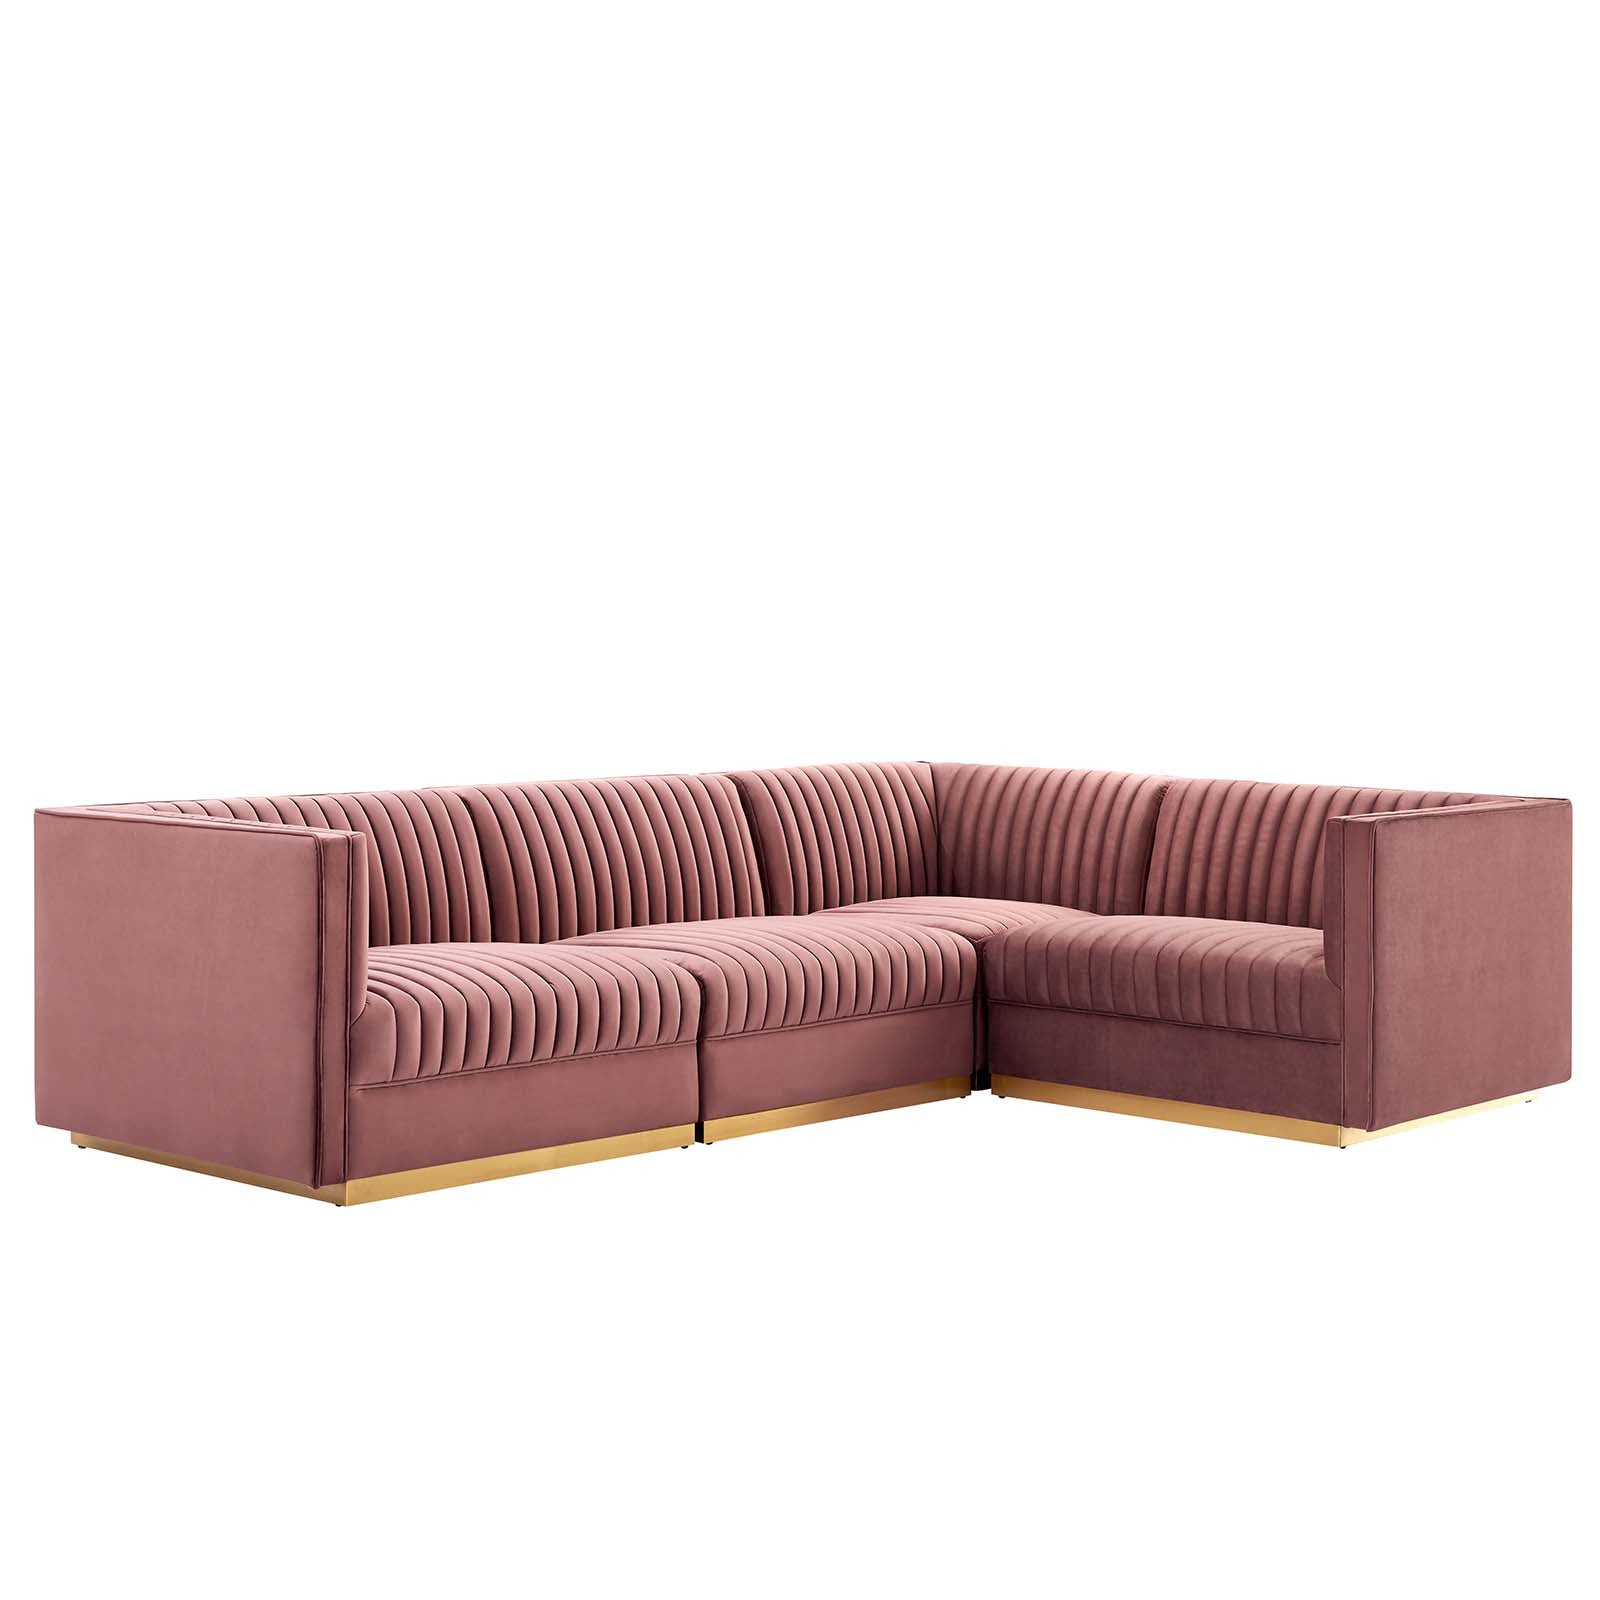 Sanguine Channel Tufted Performance Velvet 4-Piece Right-Facing Modular Sectional Sofa - East Shore Modern Home Furnishings